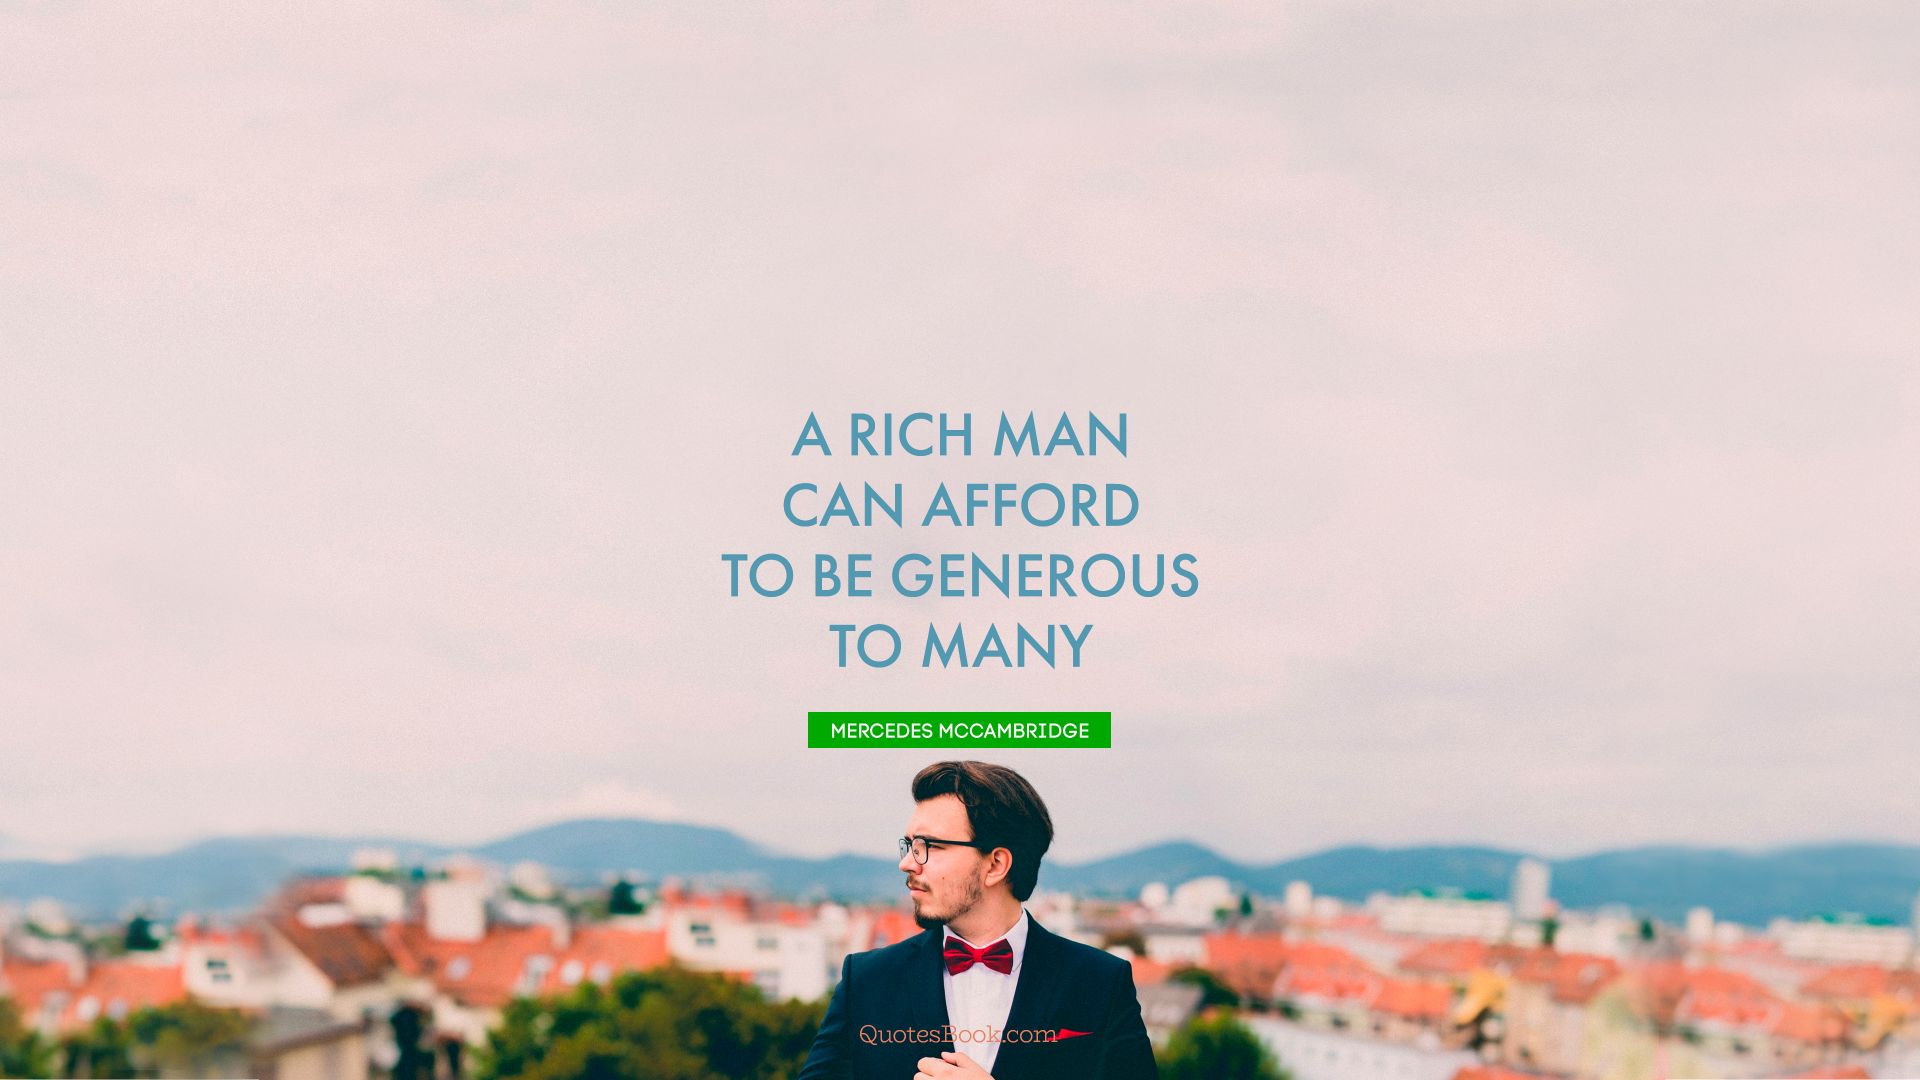 A rich man can afford to be generous to many. - Quote by Mercedes McCambridge